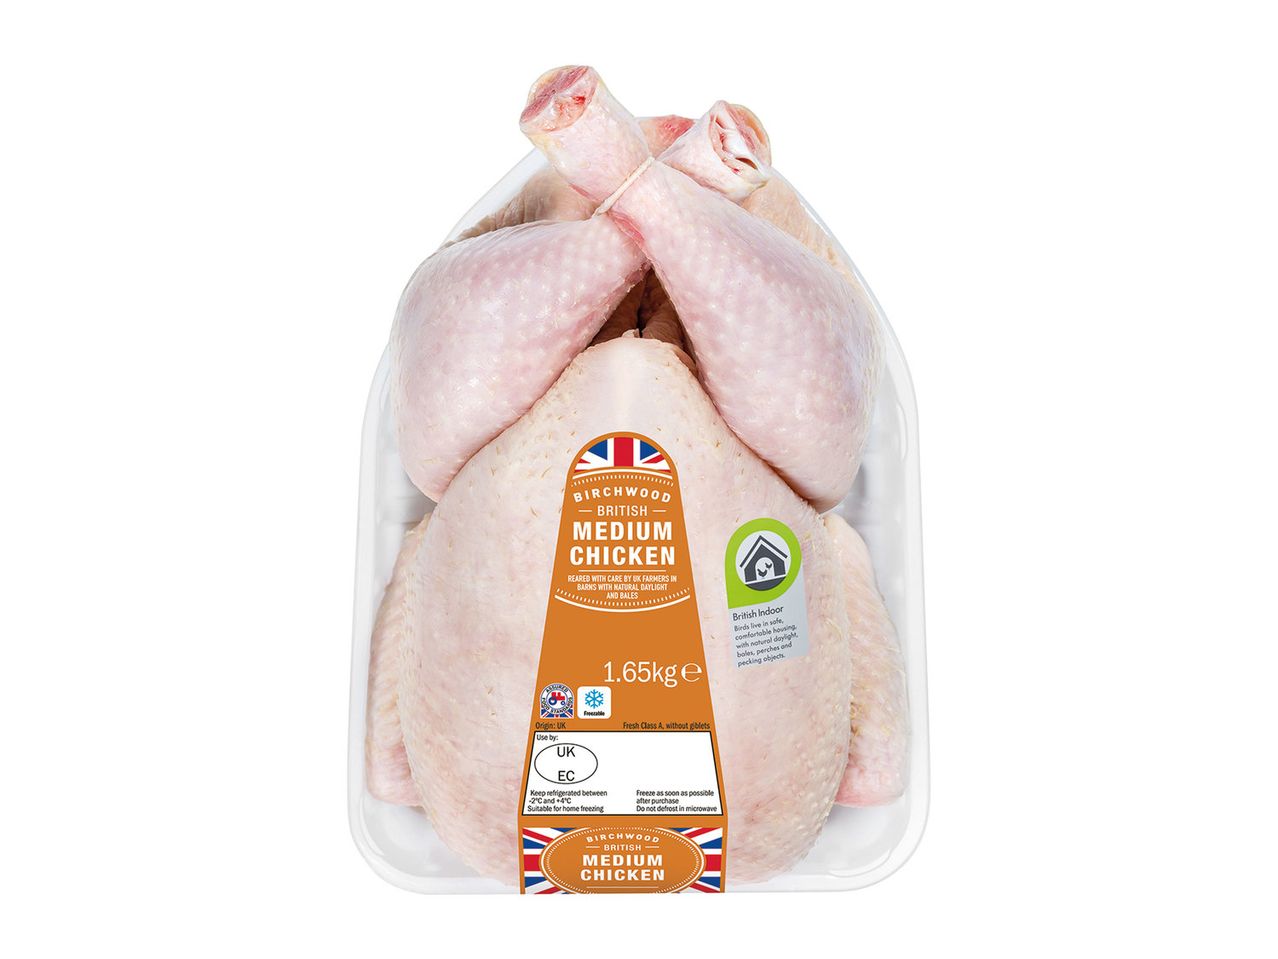 Go to full screen view: Birchwood British Large Whole Chicken - Image 1